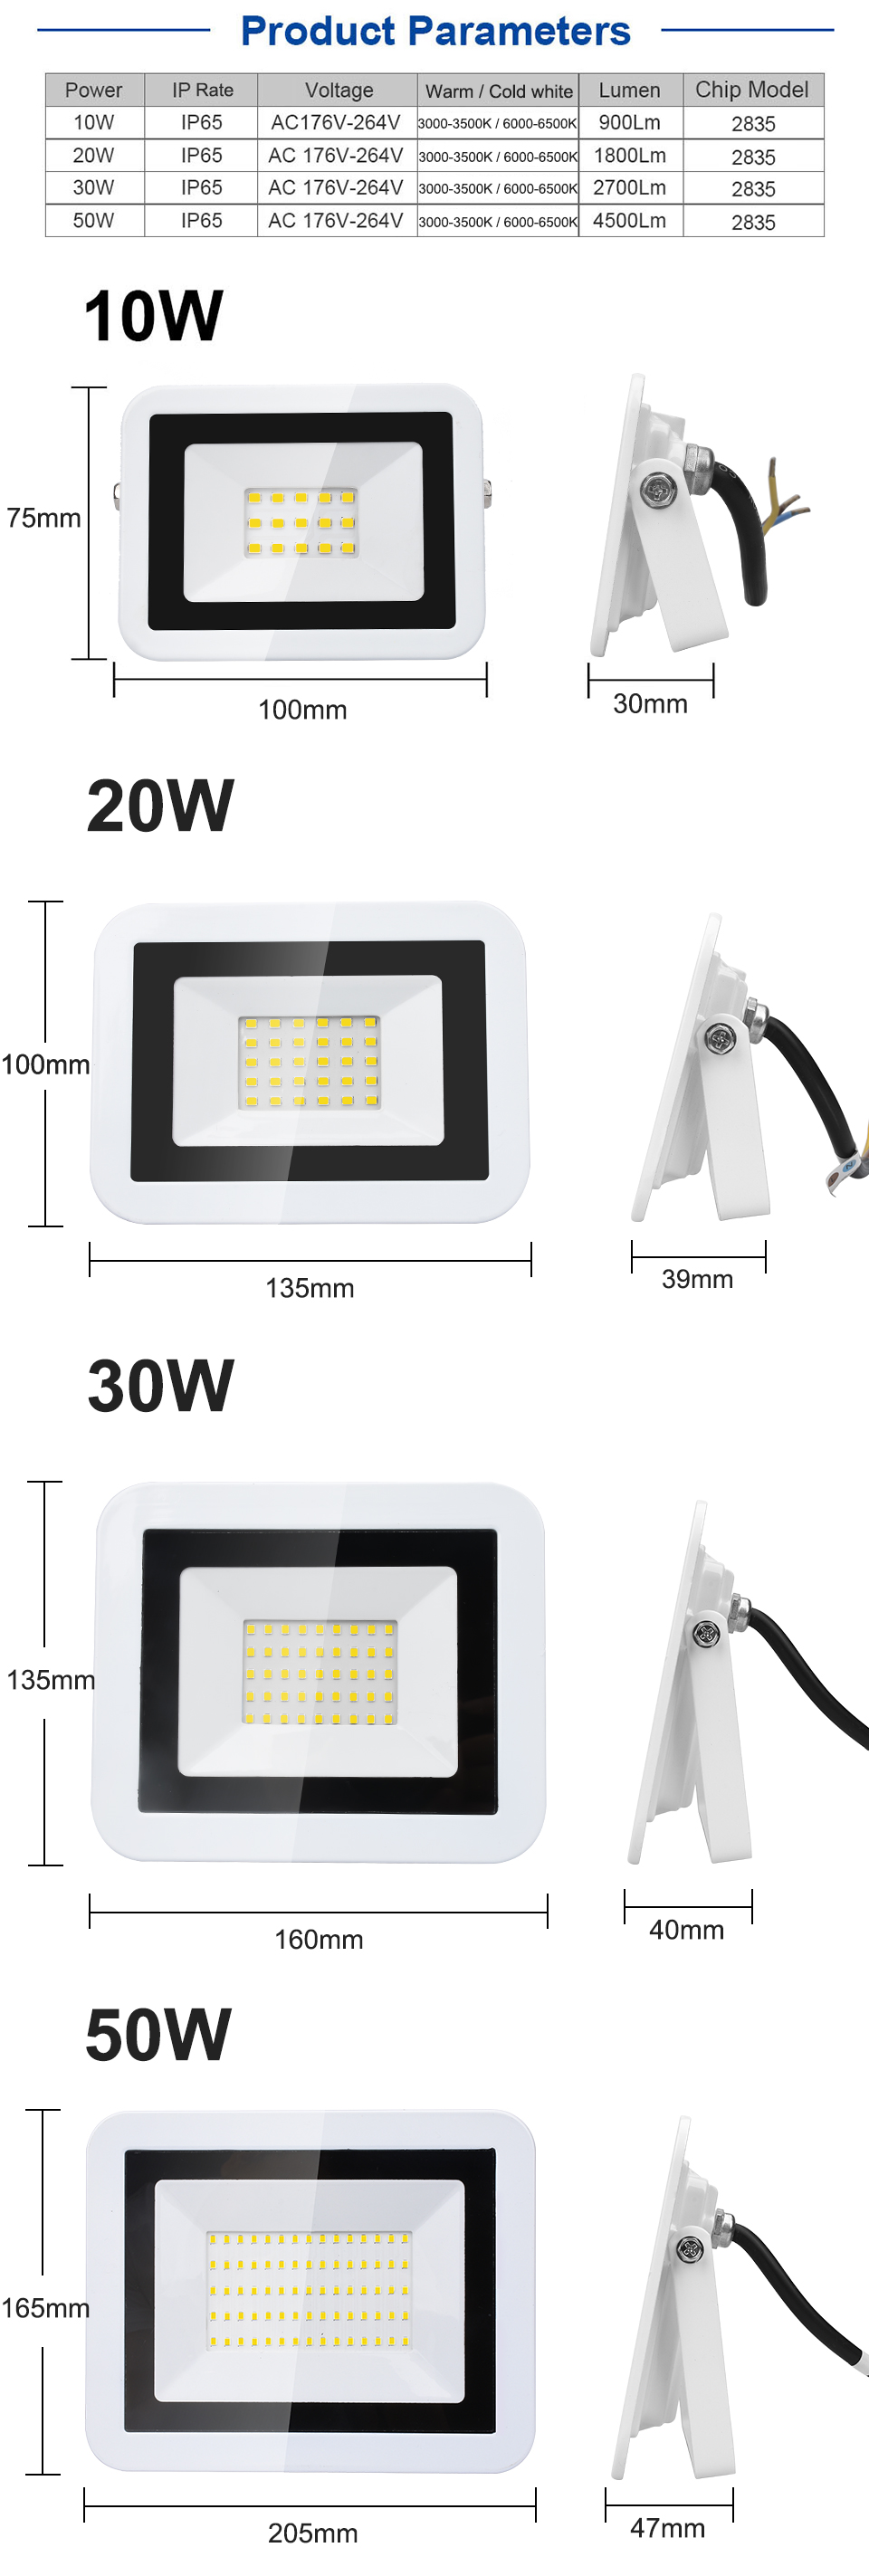 10w 20w 30w 50w Led Floodlight Outdoor Security Lights Warm White/ Cold White Outdoor Floodlight for Garage Garden Lawn and Yard